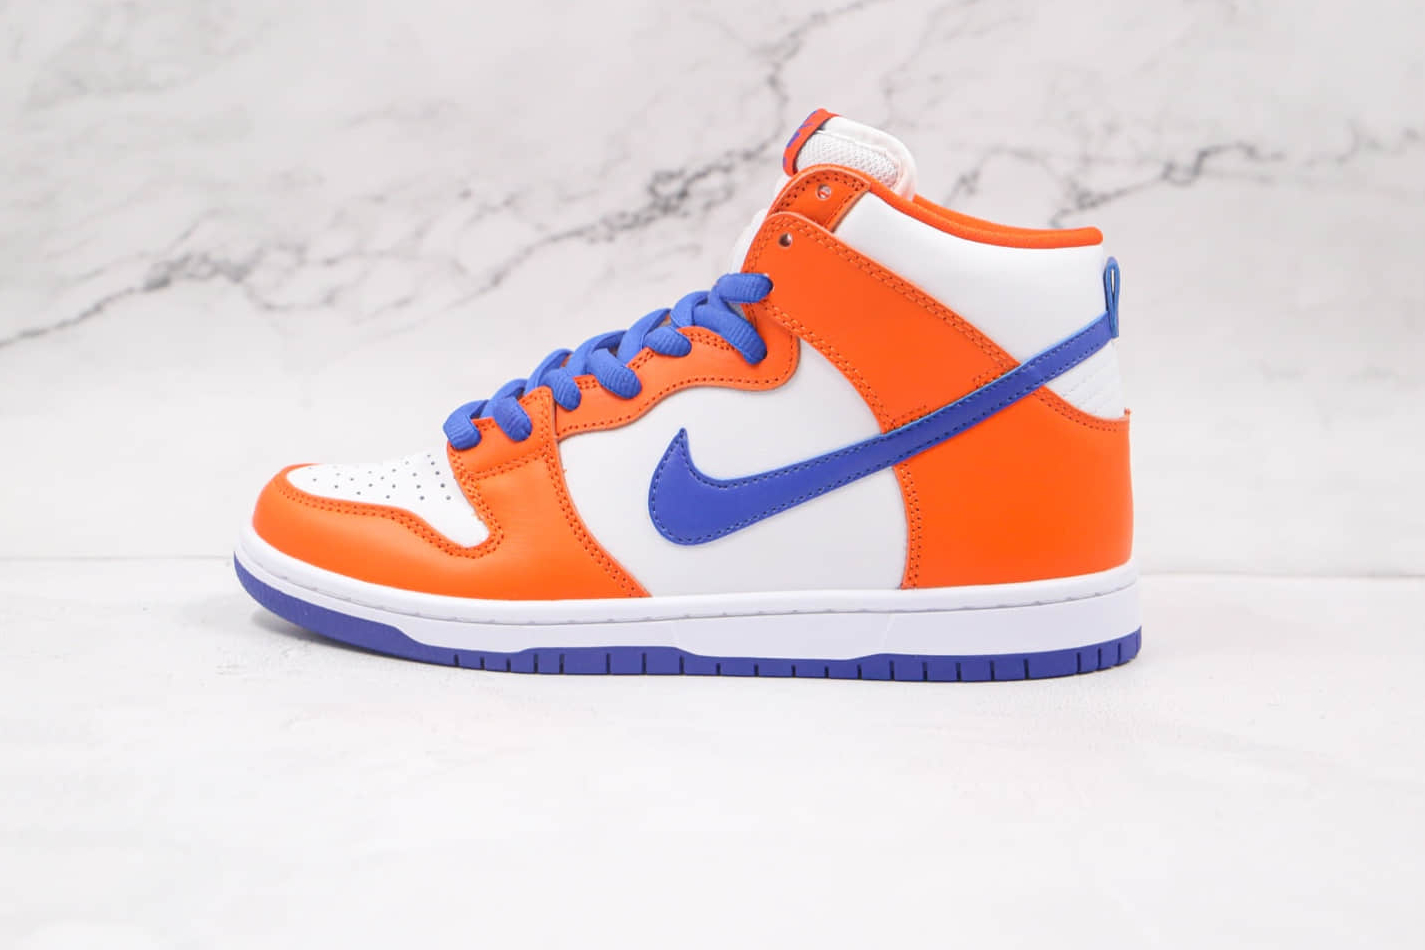 Nike SB Dunk High 'Danny Supa' AH0471-841 - Classic Style and Supreme Comfort in Every Step